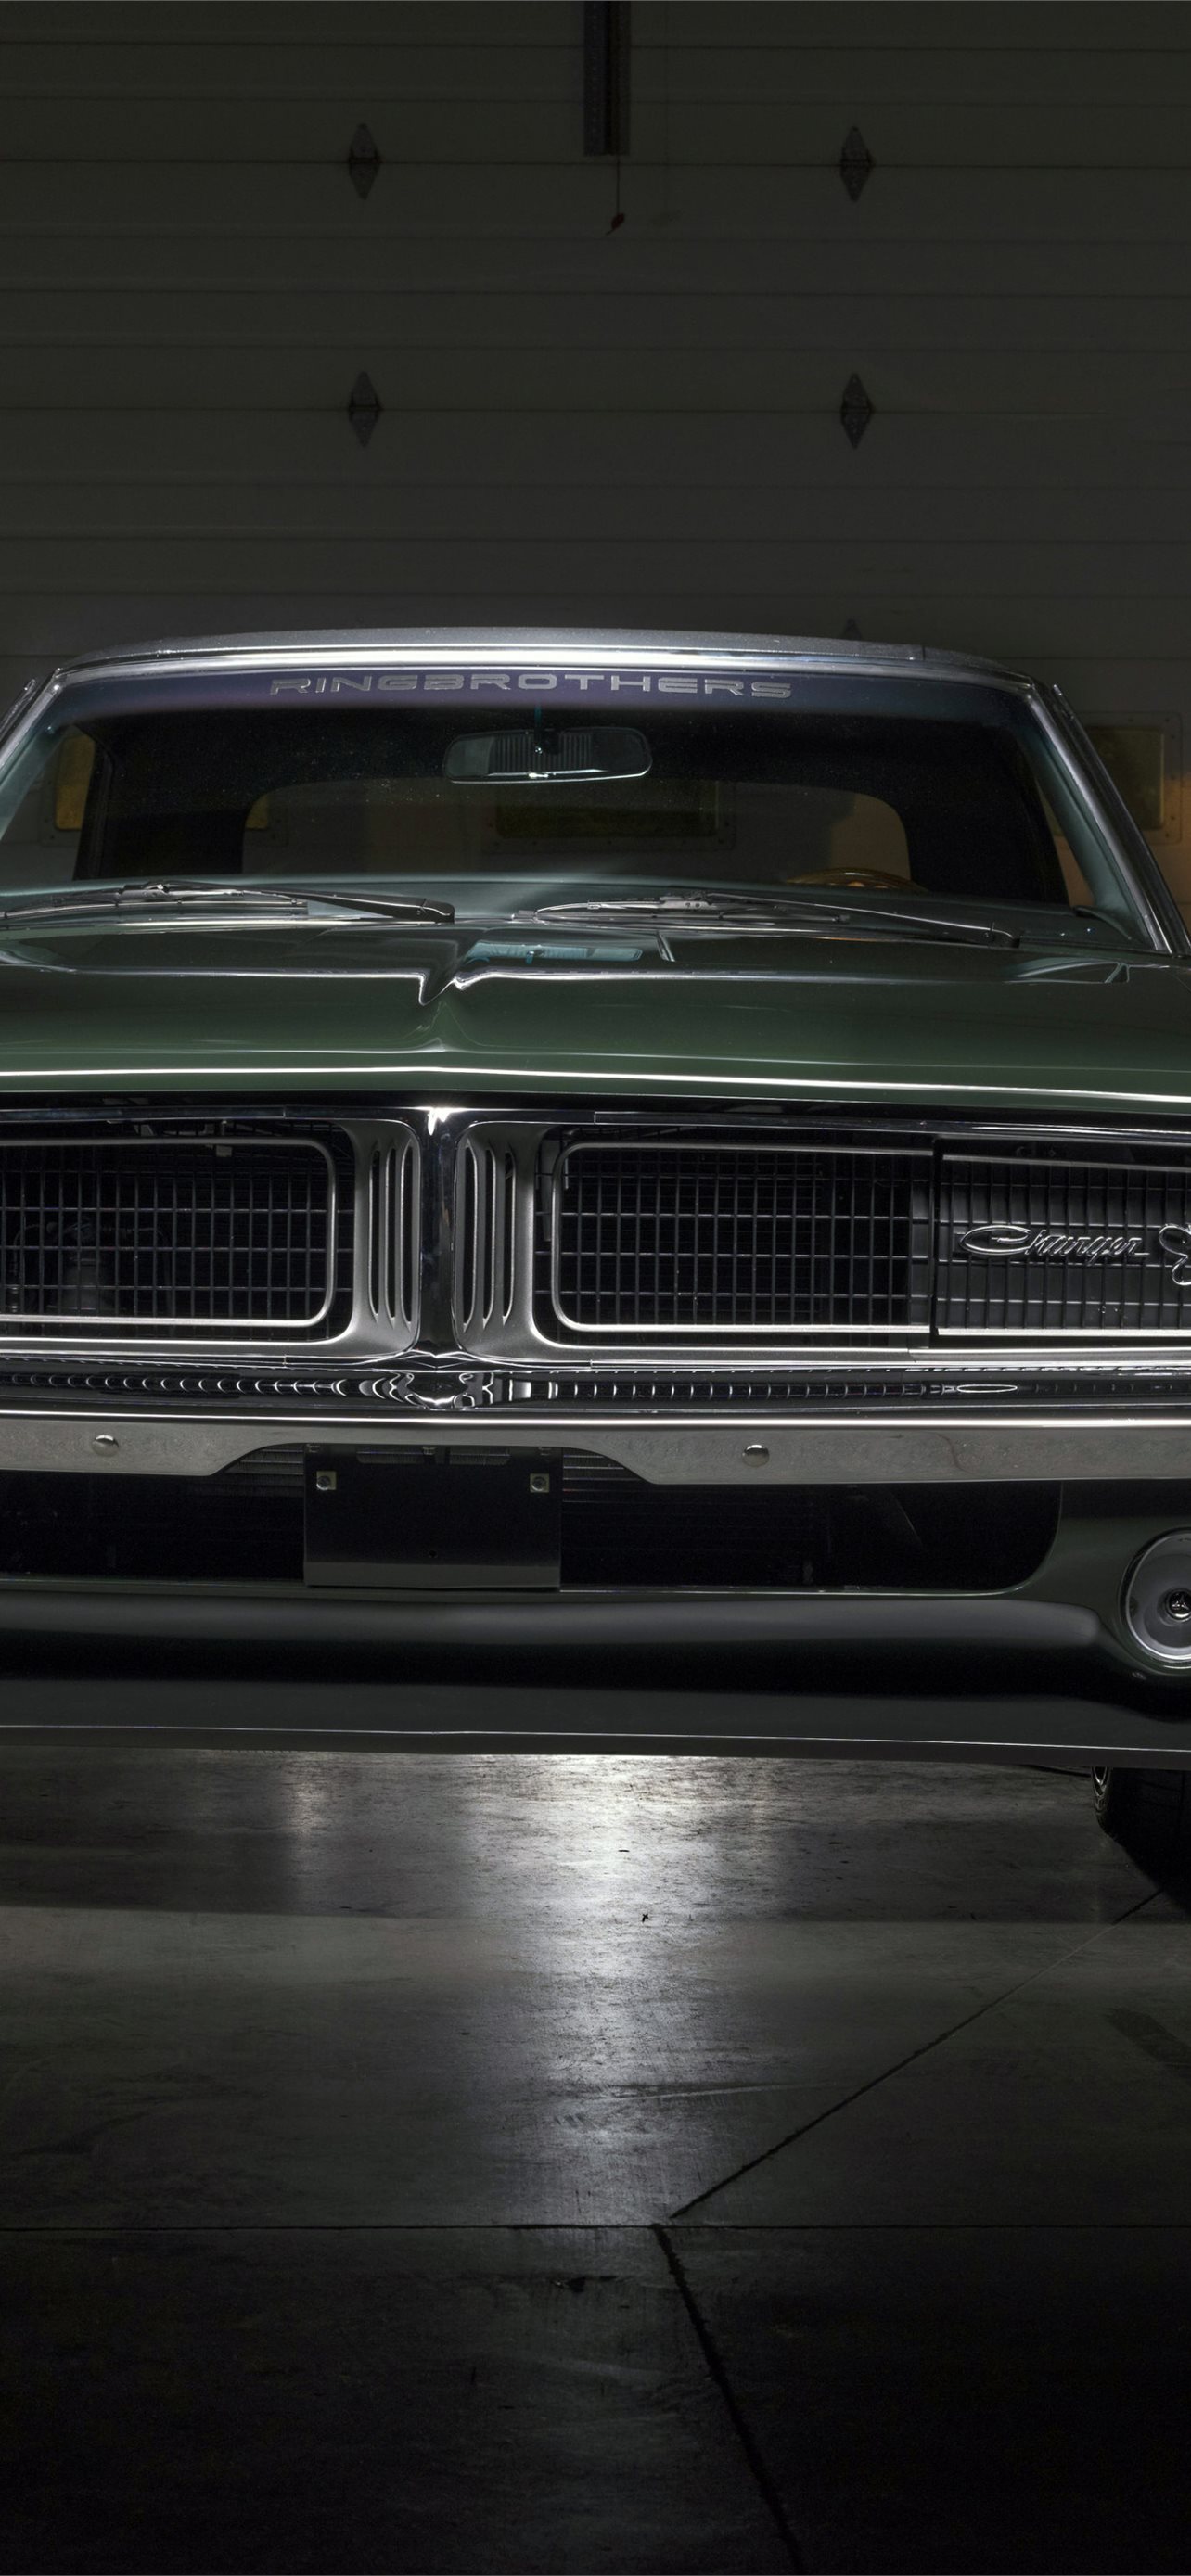 1969 Ringbrothers Dodge Charger Captiv Ultrawide Wallpaper 004  WSupercars